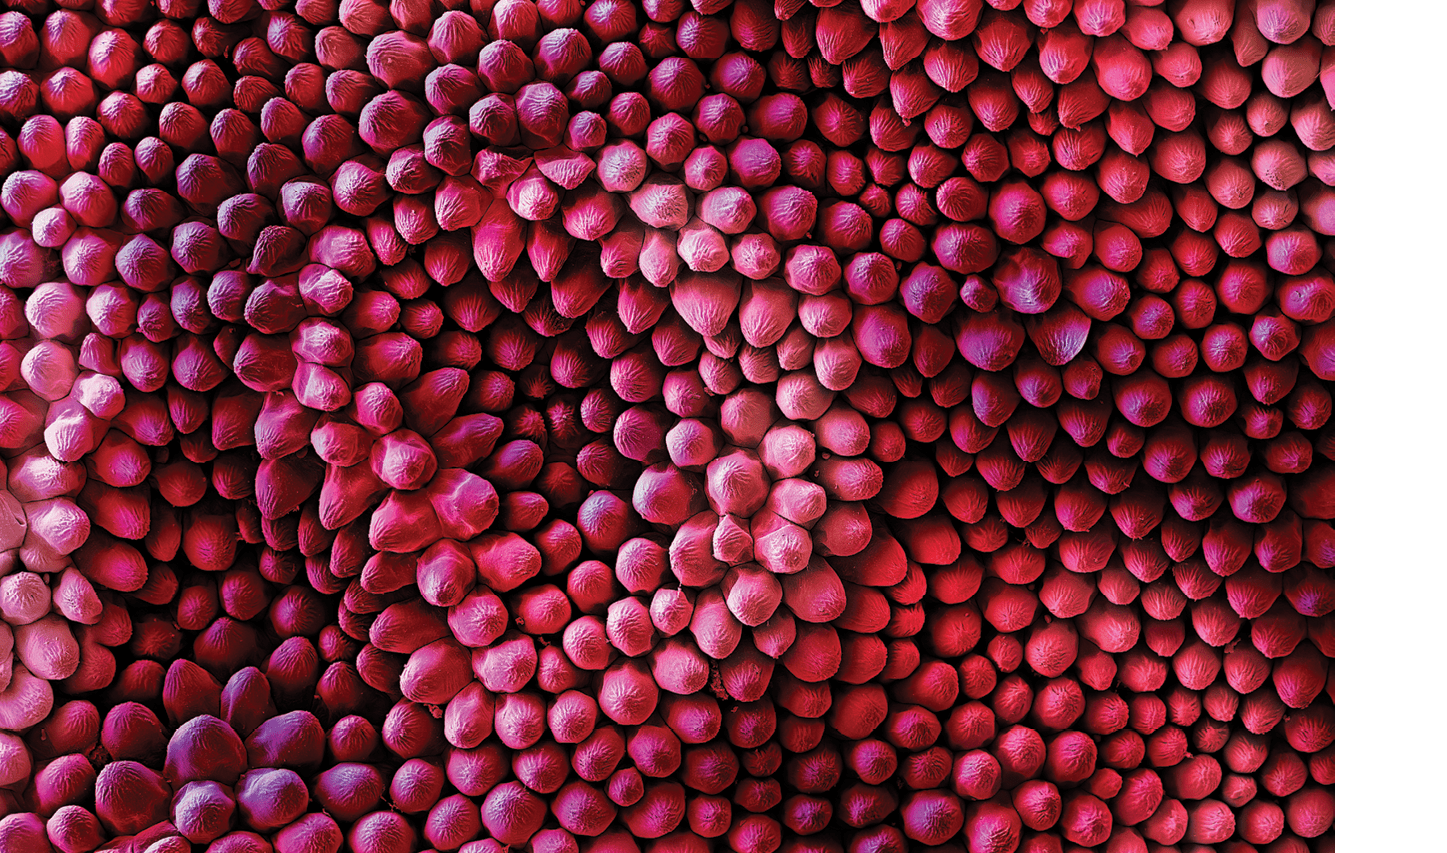 Velvet UndergroundColored Scanning Electron Micrograph of the fine structures of a Red rose petal (Rosa sp )  Hairs are only present on the lower surface of the leaf  Thousands of finely corrugated warts cause the velvet shimmer on the upper surface of dark red rose petals A superhydrophobic surface is a surface on which a drop of water forms an almost perfect sphere and even a very slight tilting is sufficient to cause the water drop to roll off  Biological tiny structures have been observed on many kinds of surfaces such as lotus leaves, rice leaves, butterfly wings, mosquito eyes, moth eyes, cicada wings, gecko feet, desert beetle, spider silks, fish scales, and red rose petals which exhibit excellent hydrophobicity and or superhydrophobicity  Understanding the anti-wetting principles of surfaces is of special interest, because properties such as anti-sticking, anti-contamination, and self-cleaning are expected, and therefore surfaces with superhydrophobic properties are attractive for many industrial and biological applications, such as anti-biofouling paints for boats, anti-sticking and self-cleaning windshields and windows, microfluidics, stain resistant textiles, anti-soiling architectural coatings, or dust-free coatings on building glasses, and other biological and technical applications  